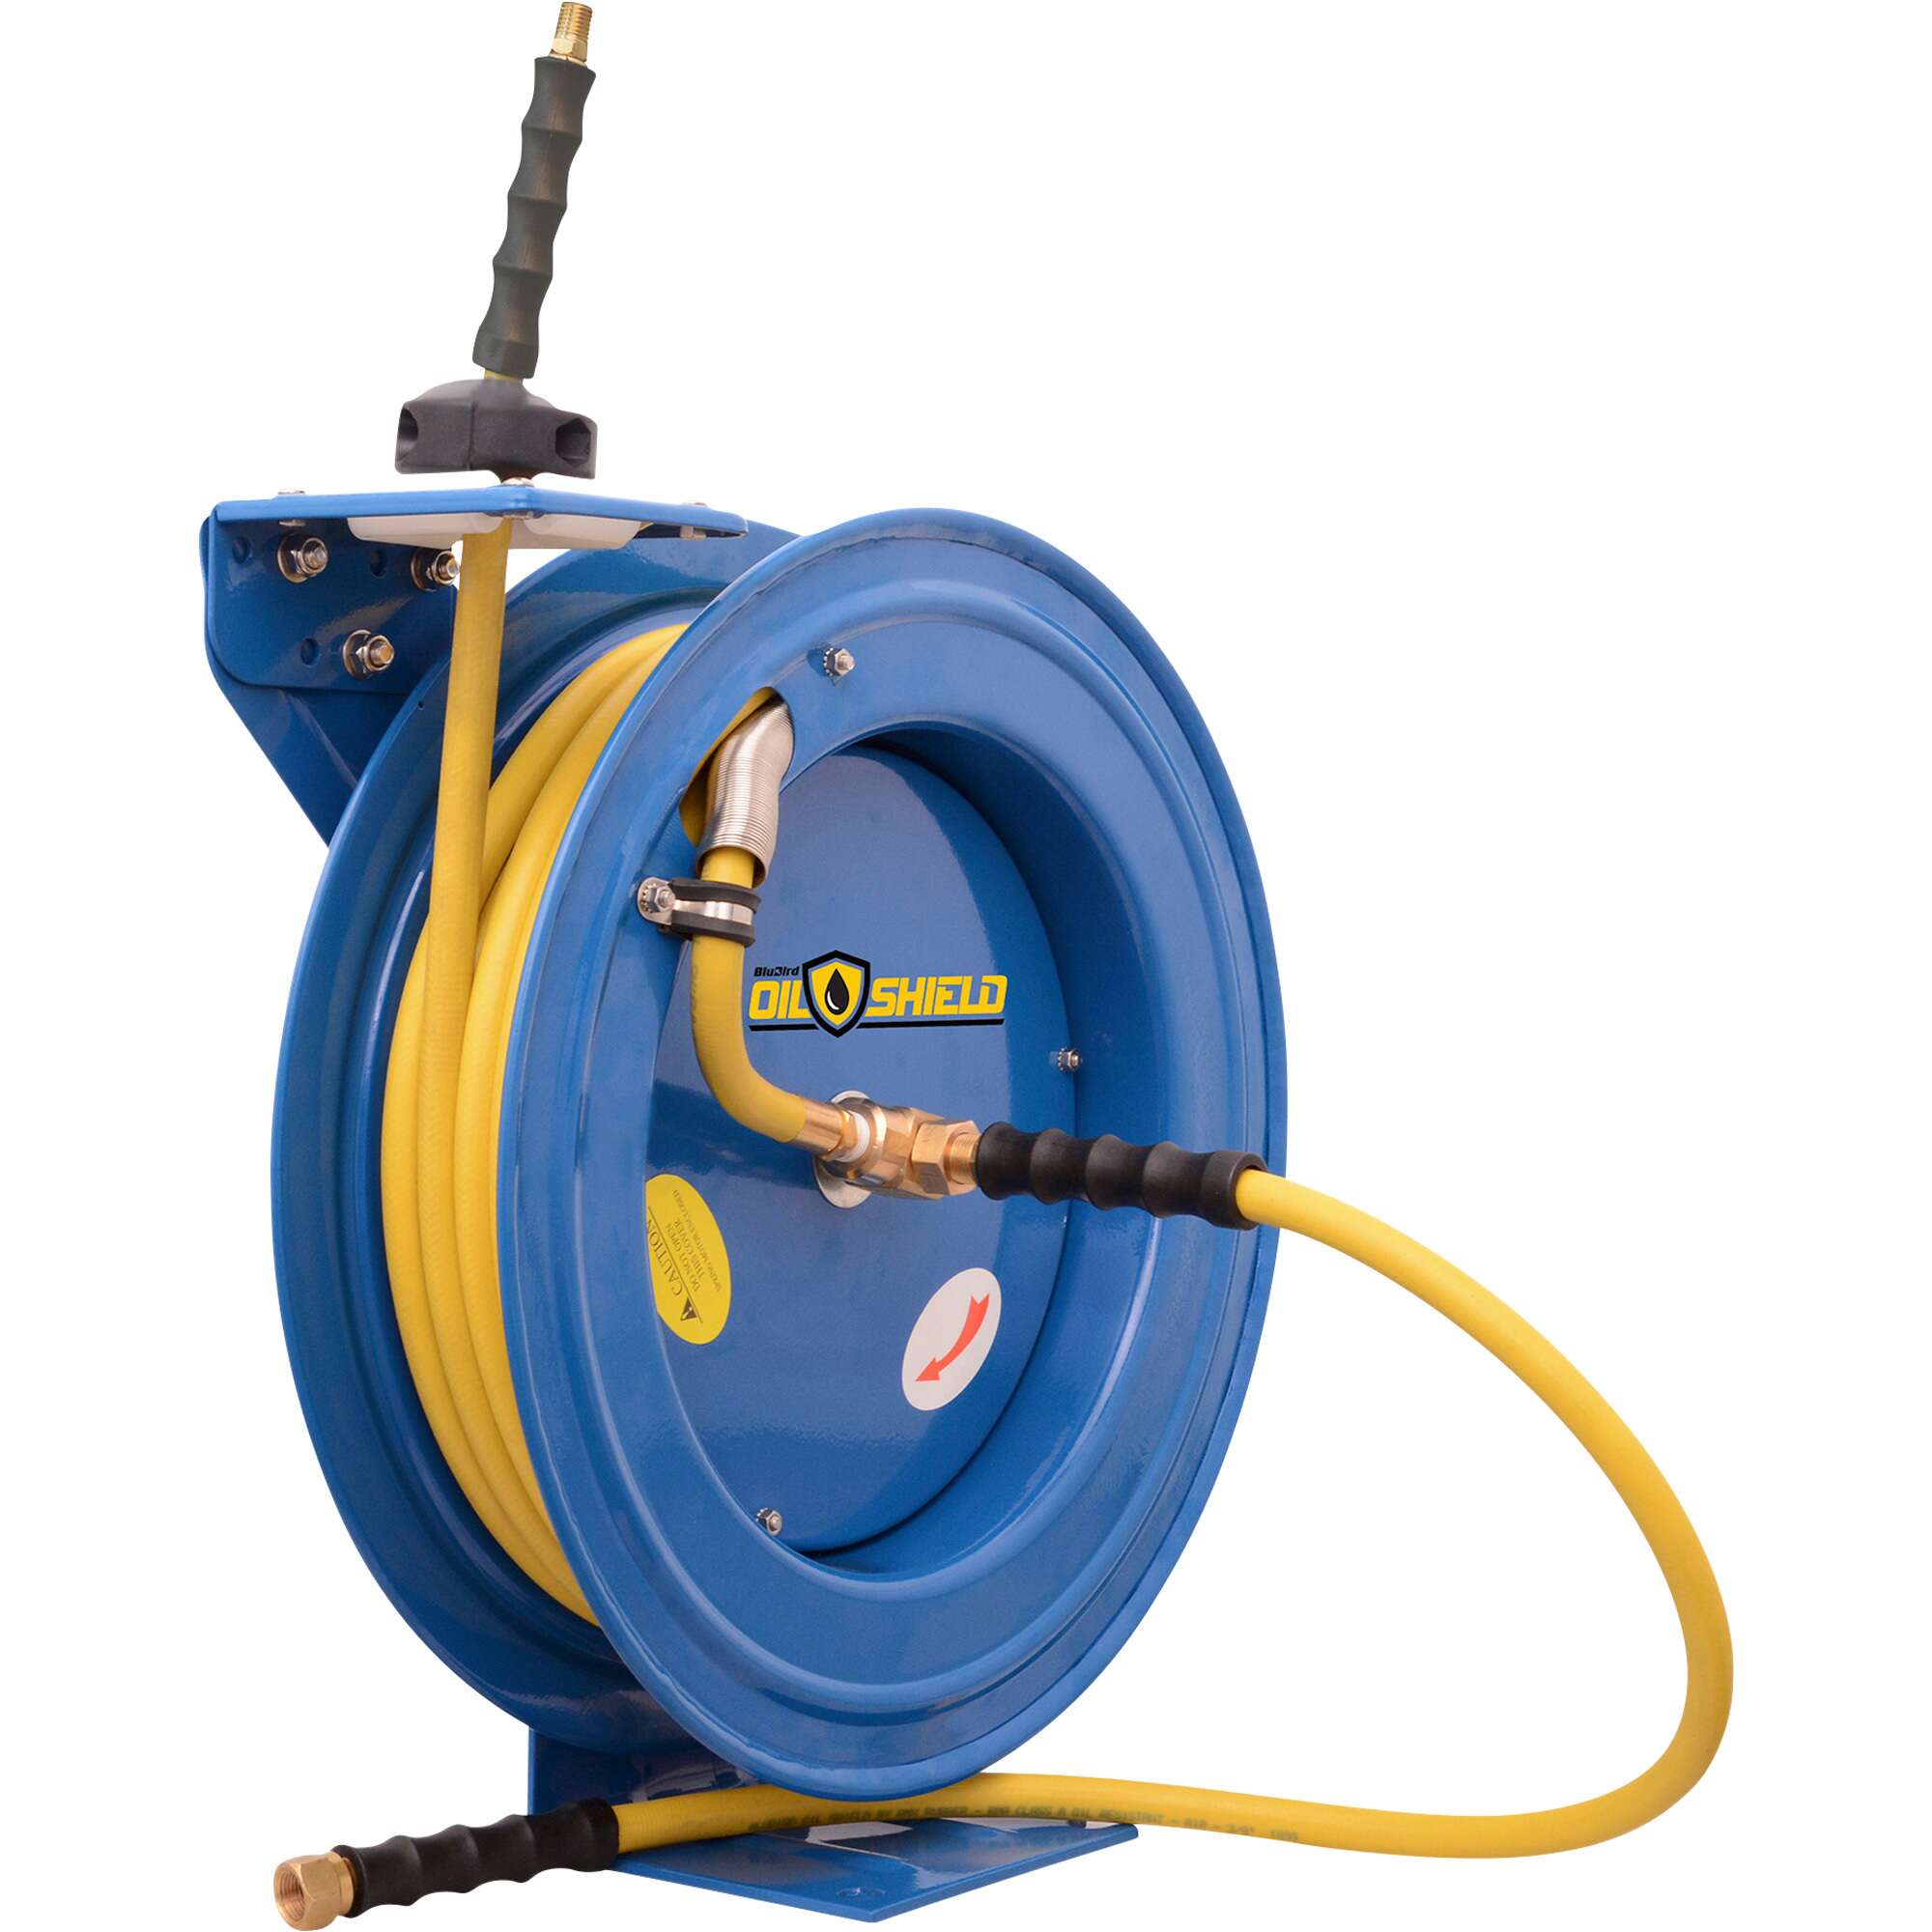 Oil Shield Retractable Air Hose Reel With 1